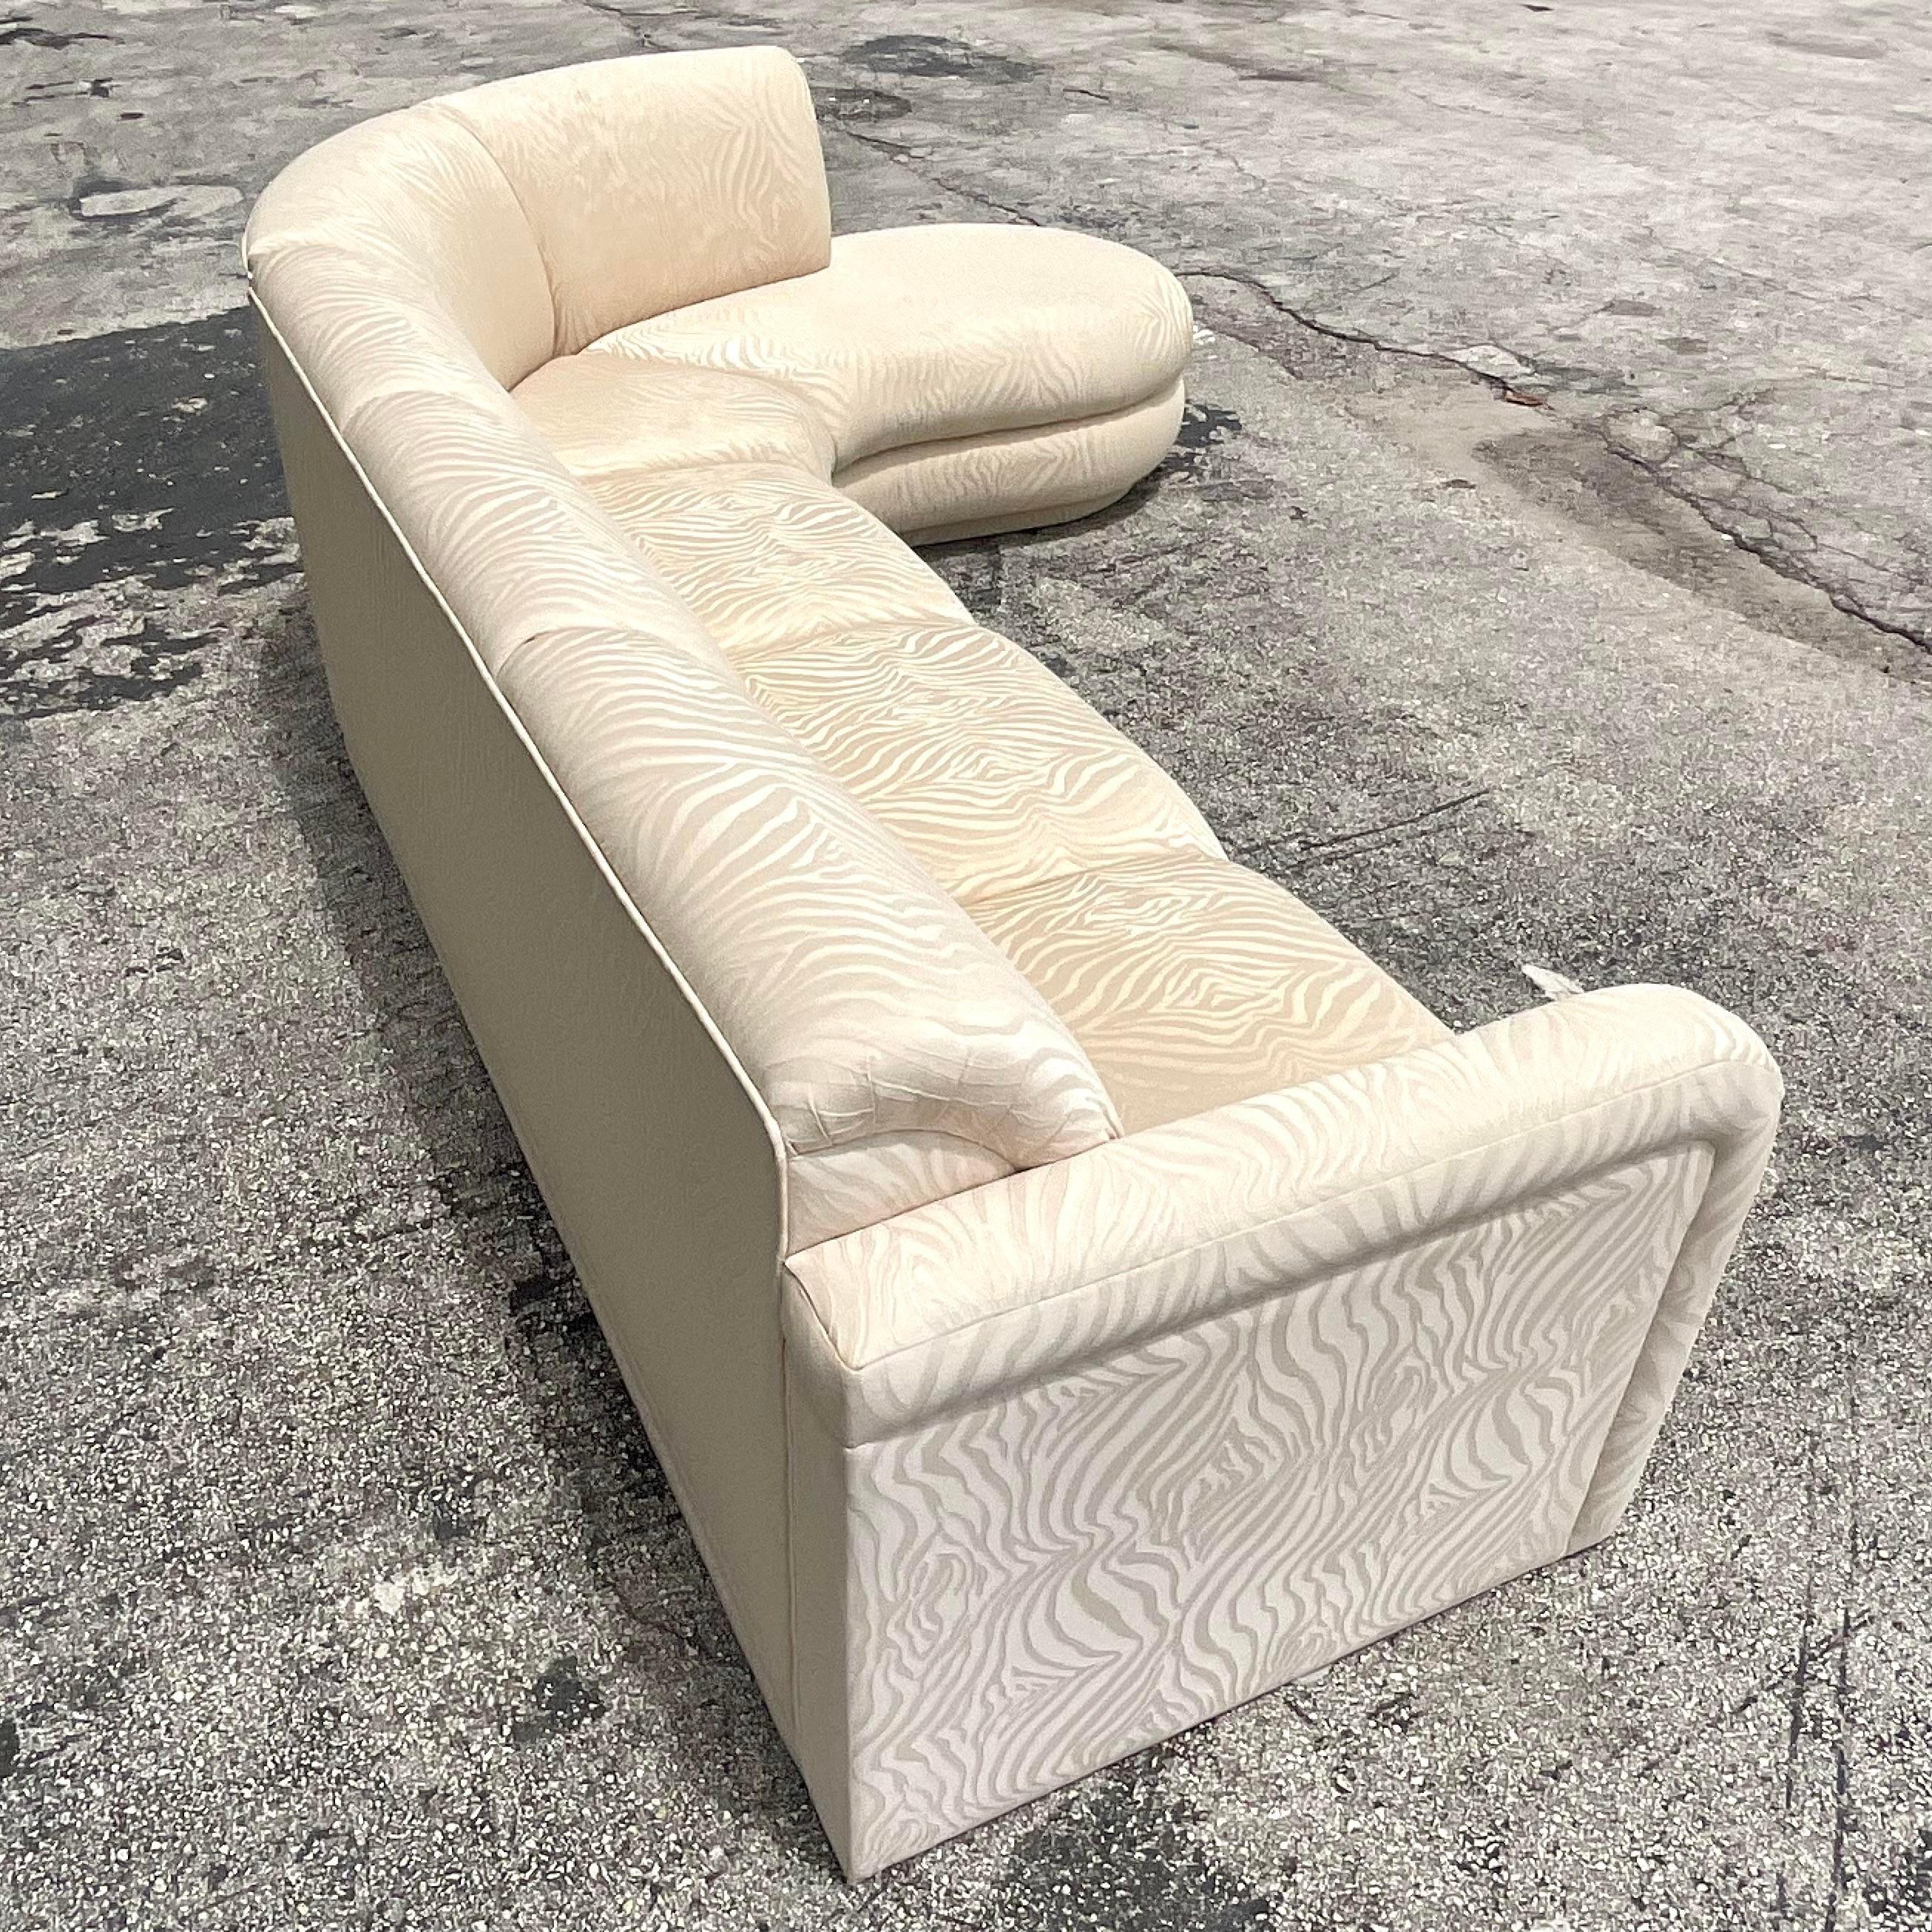 Vintage Boho Zebra Jacquard Biomorphic Sectional Sofa In Good Condition For Sale In west palm beach, FL